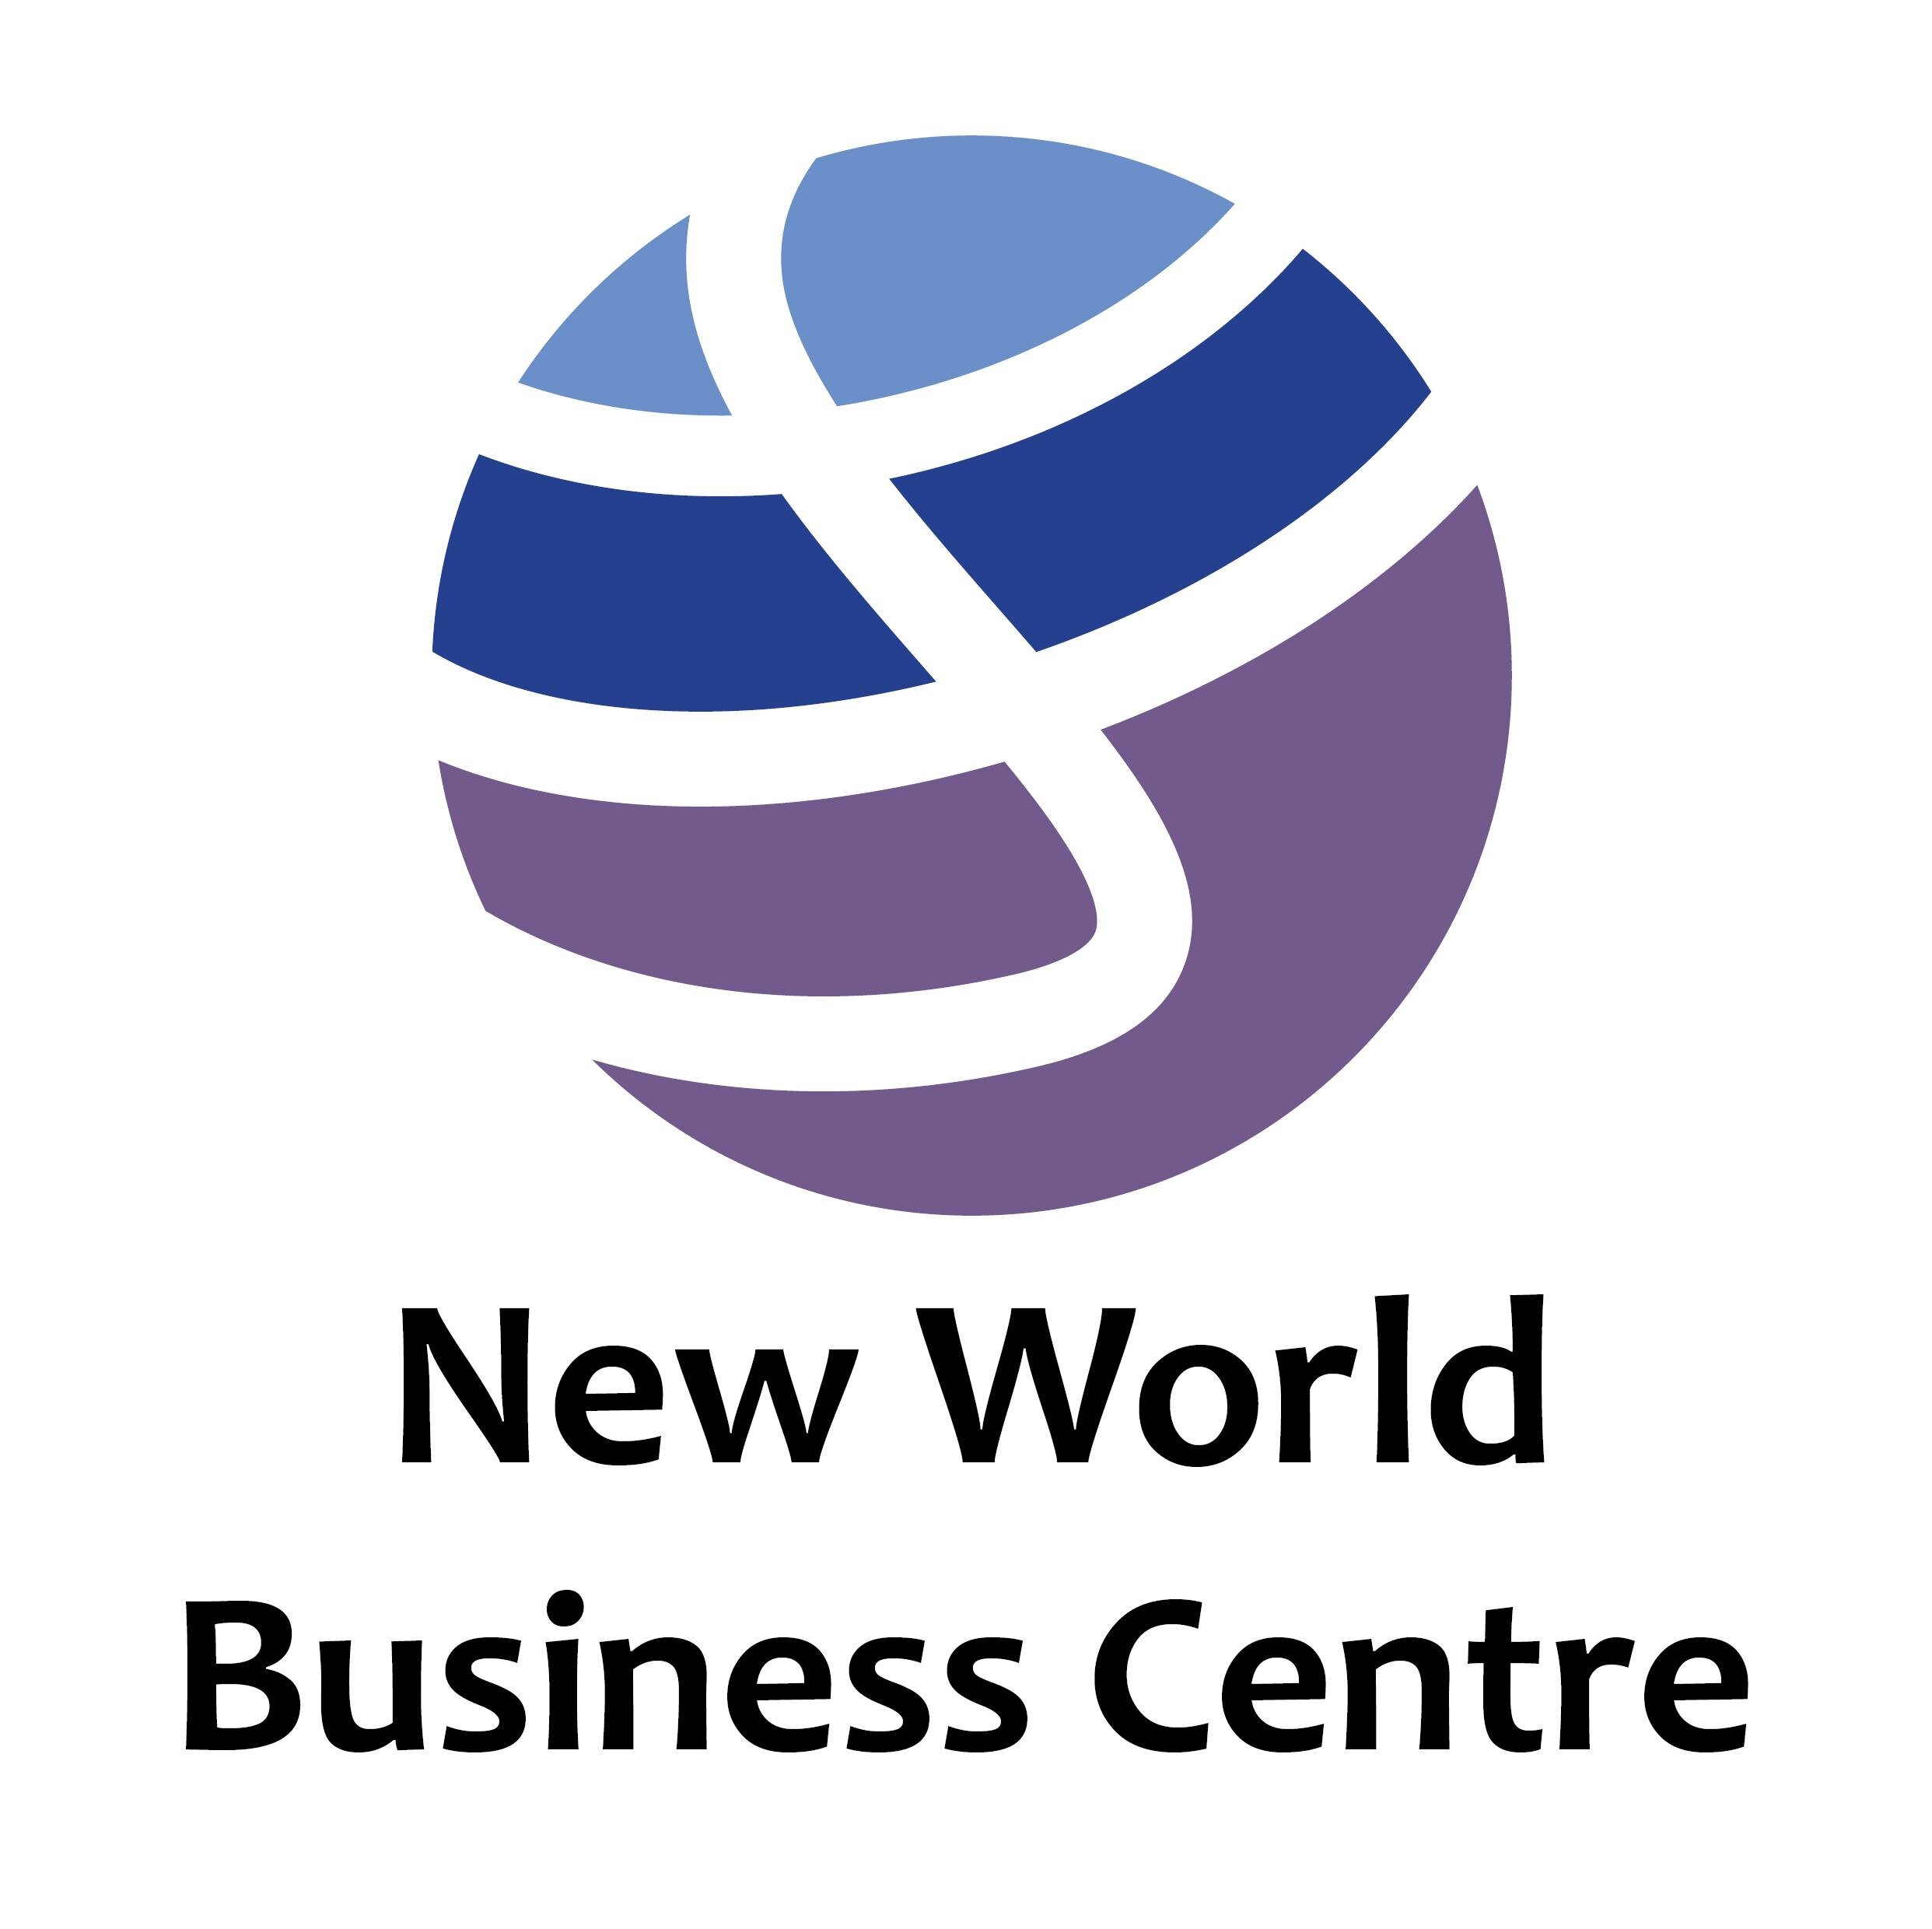 New World Business Centre is Actual and Virtual office space, conference and meeting room facilities. 0117 3320900